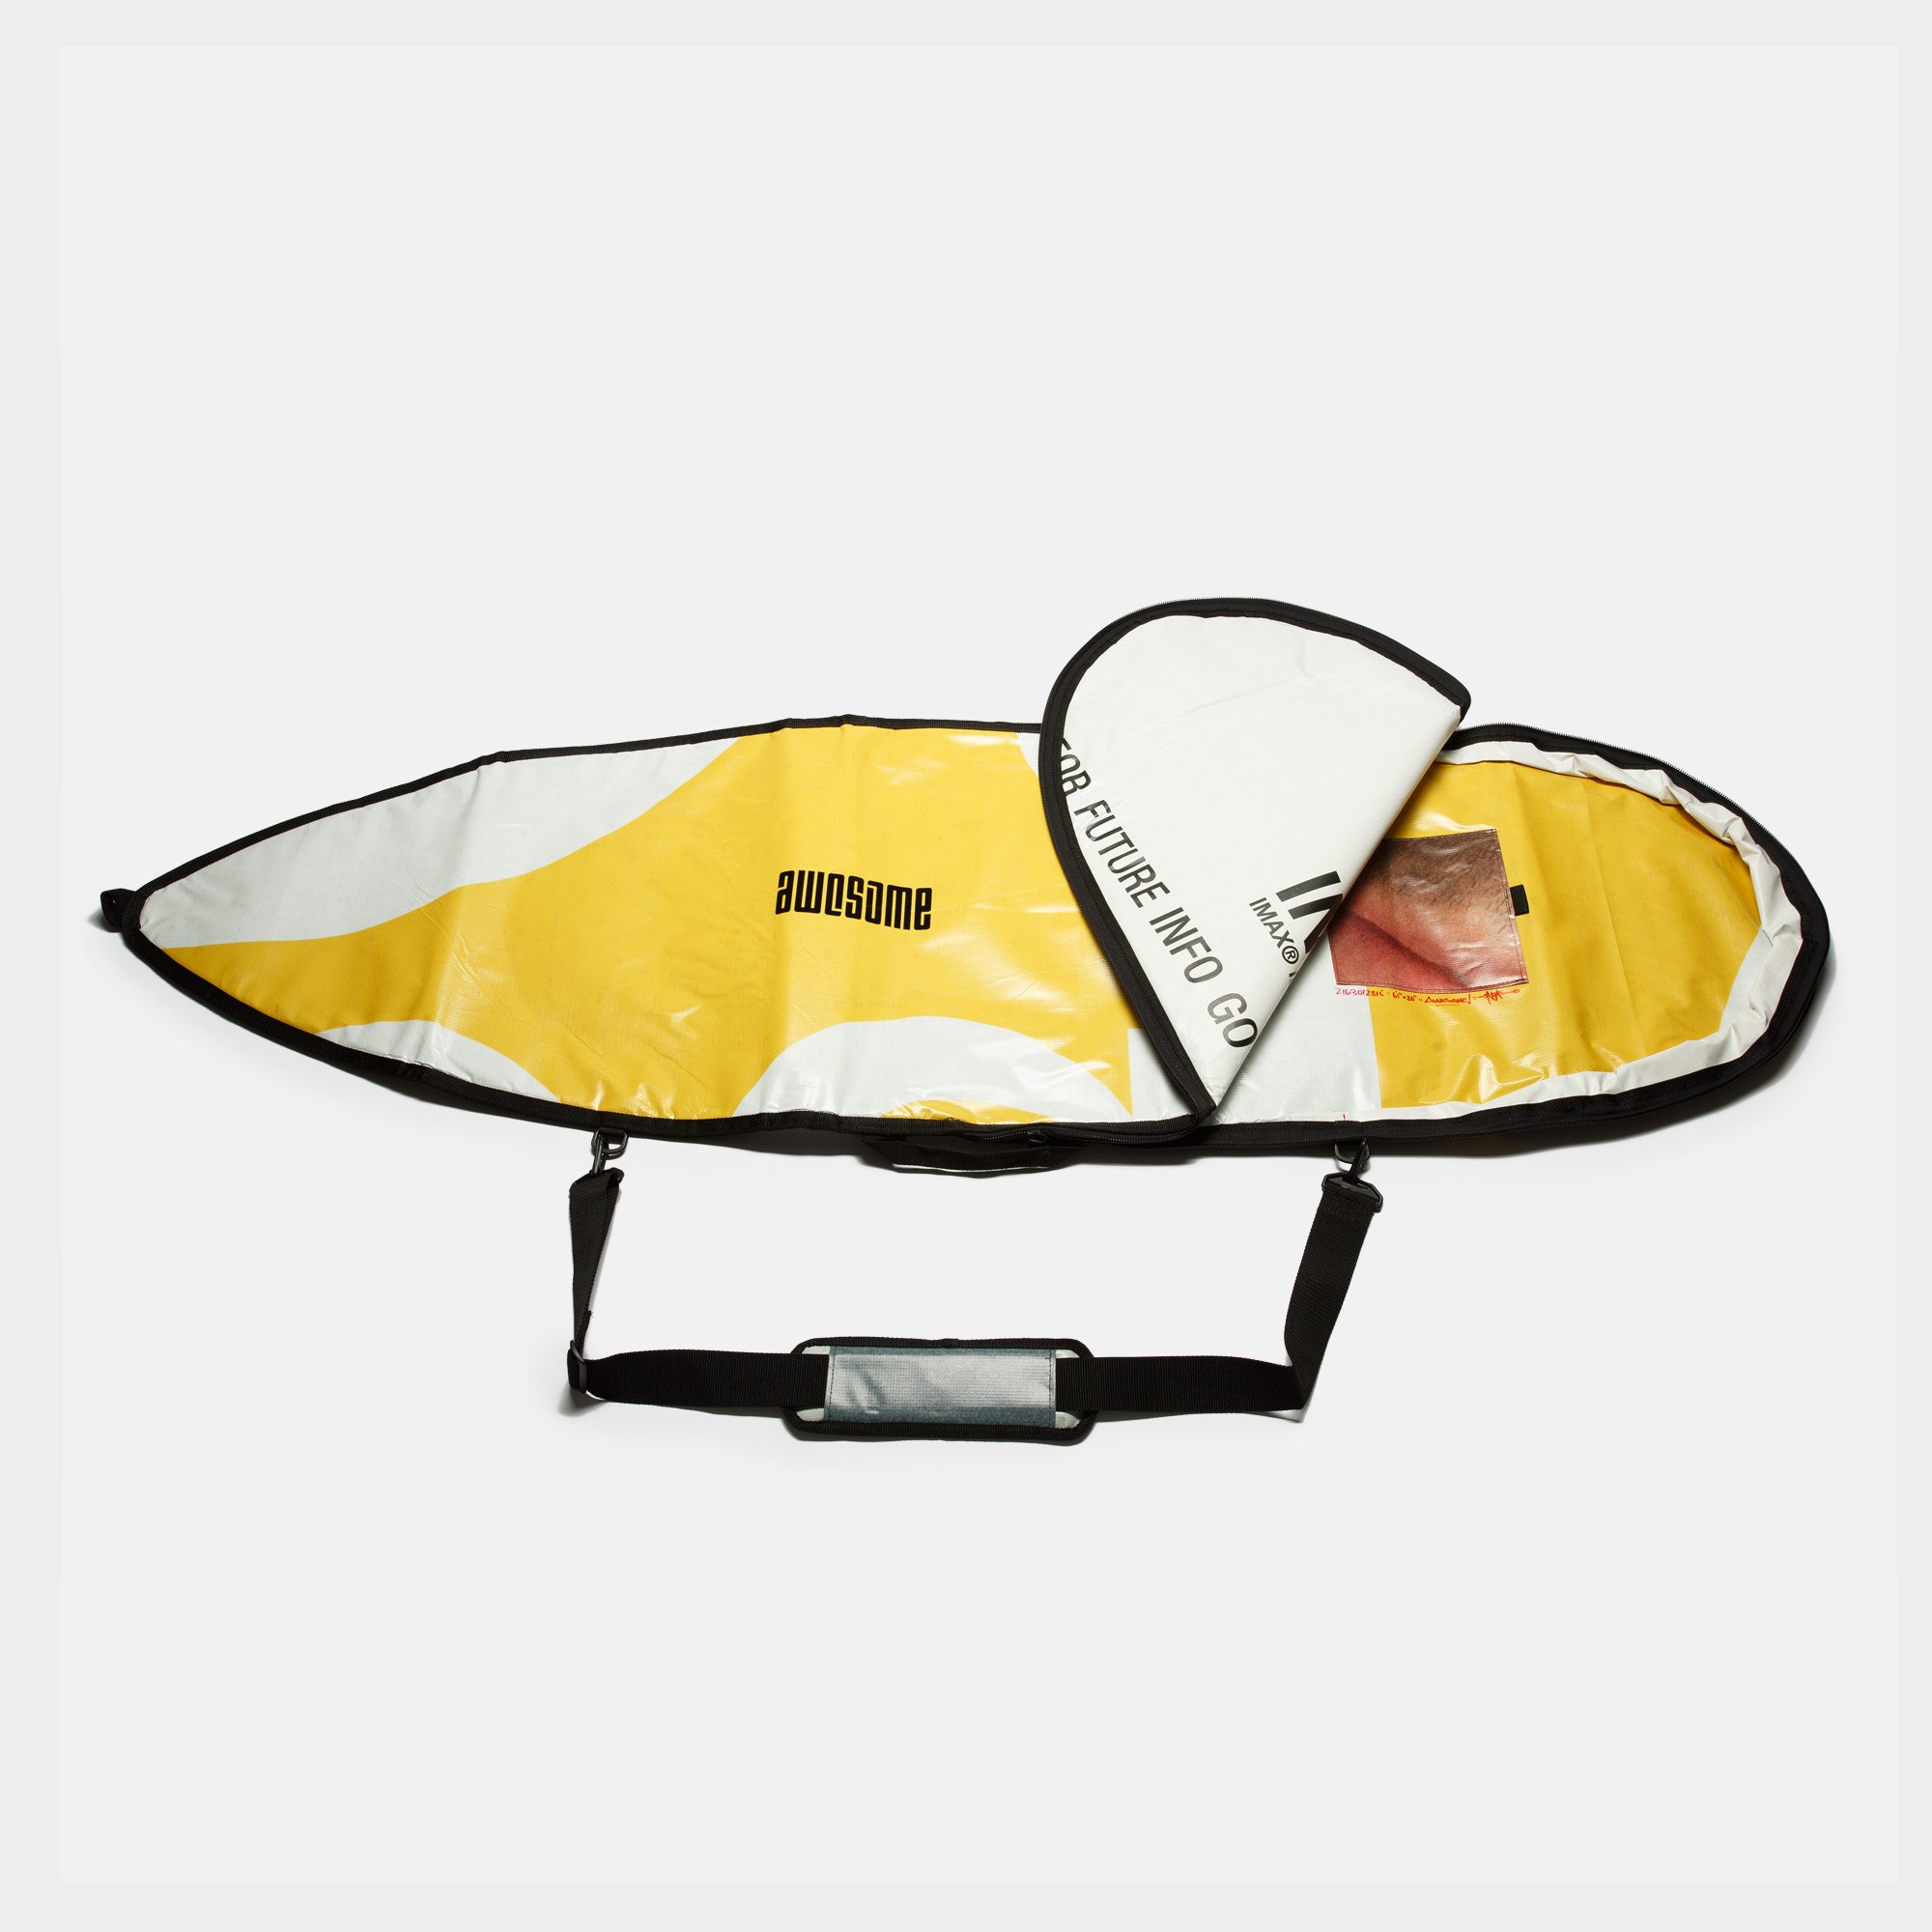 6'1 Awesome x The Progress Project Boardbag - Yellow